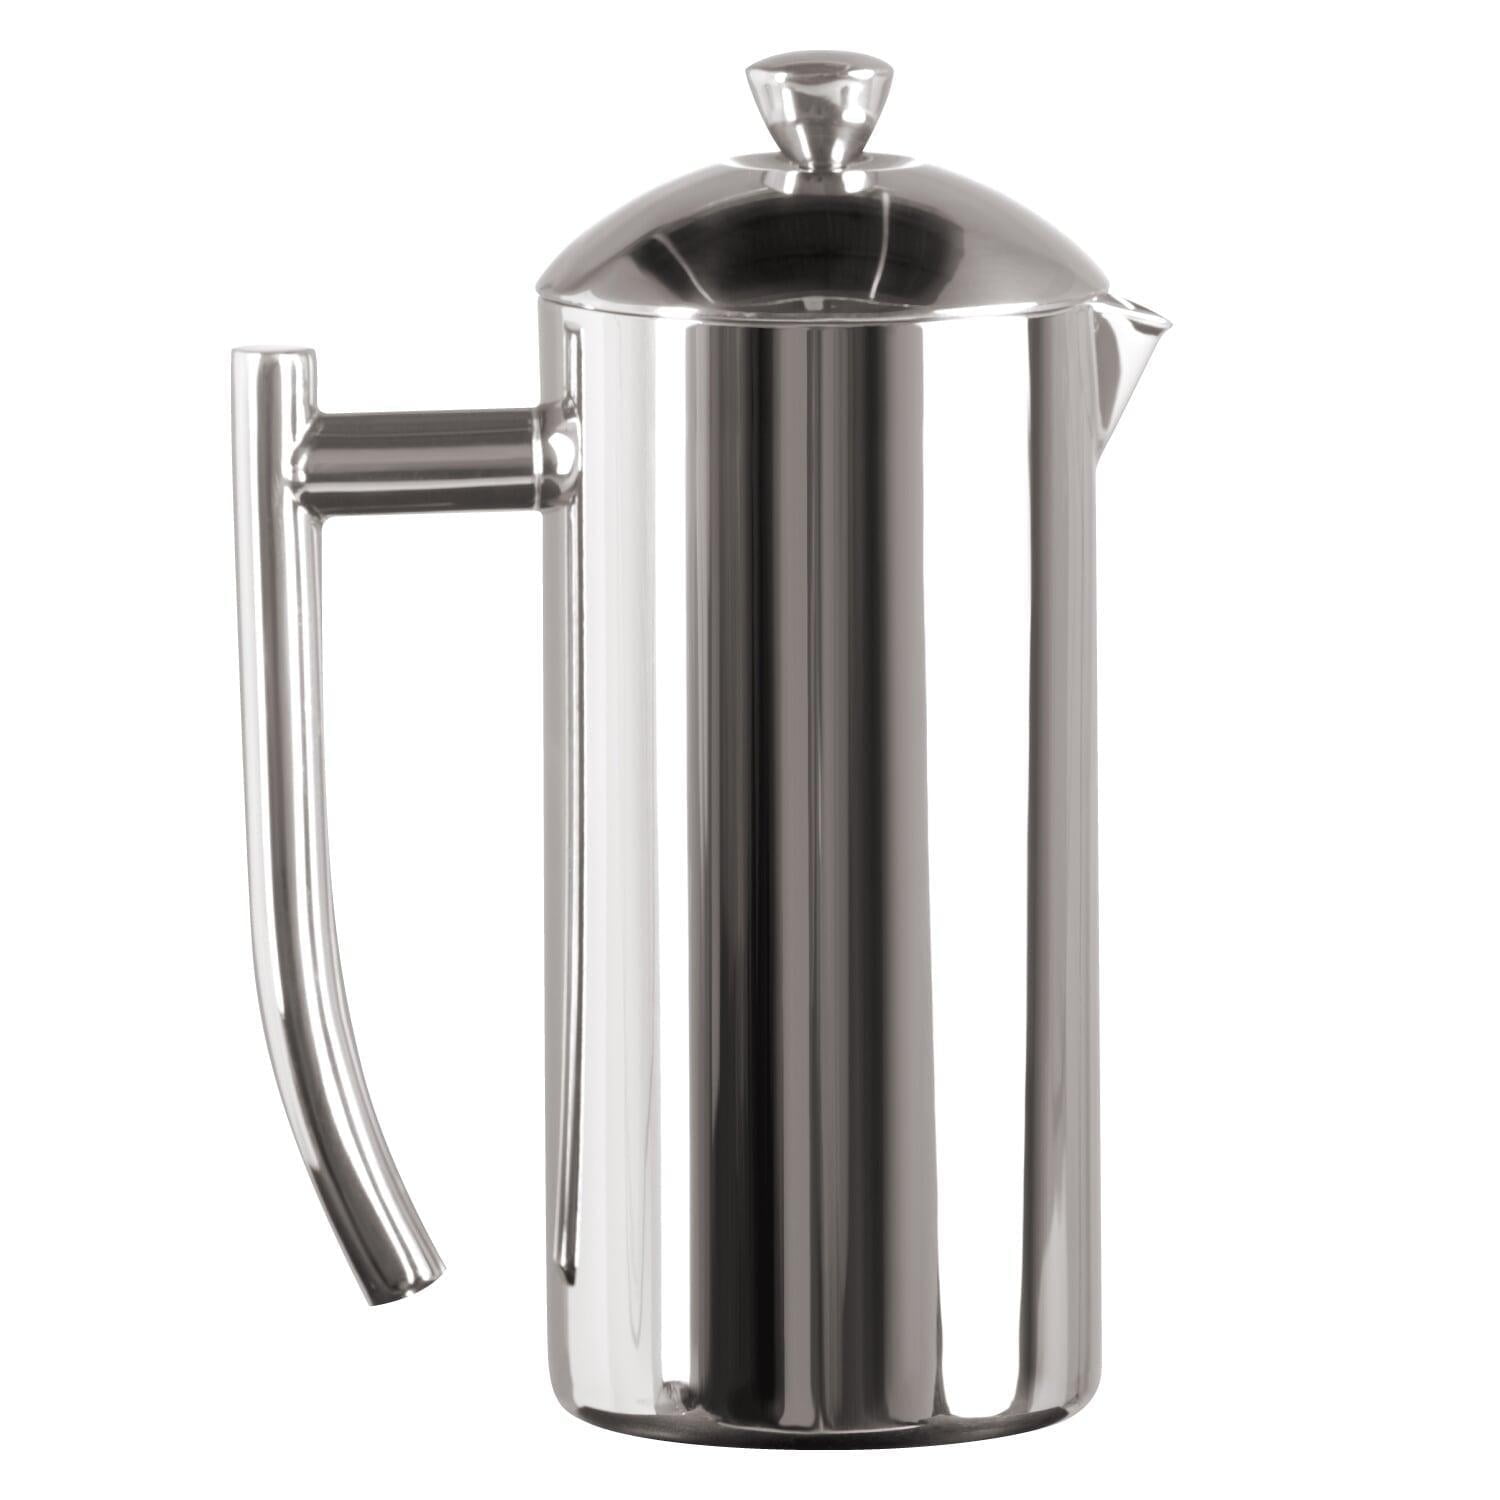 Unnki French Press Coffee Maker,304 Stainless Steel Double Wall  Borosilicate Glass Coffee Press,with Multiple Filtration System,2 Extra  Filters,600ml